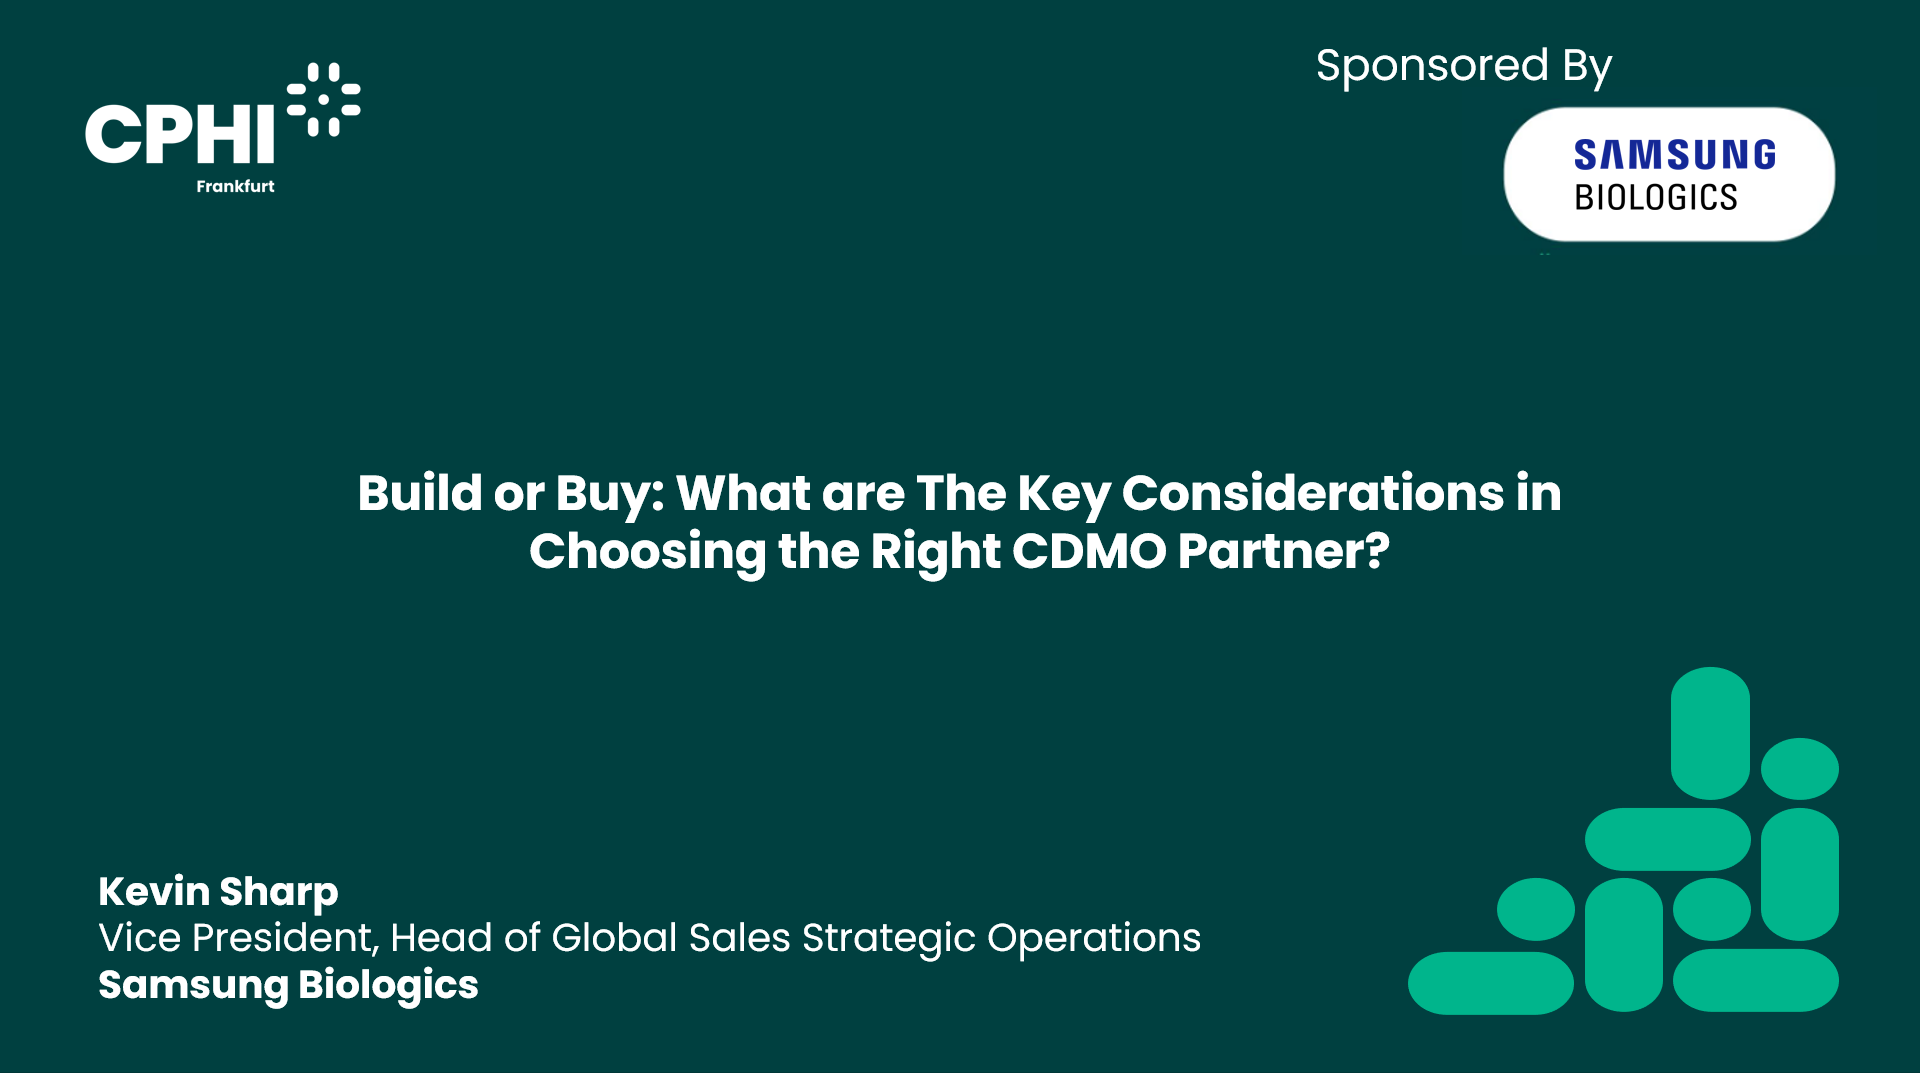 Build or Buy: What are The Key Considerations in Choosing the Right CDMO Partner?